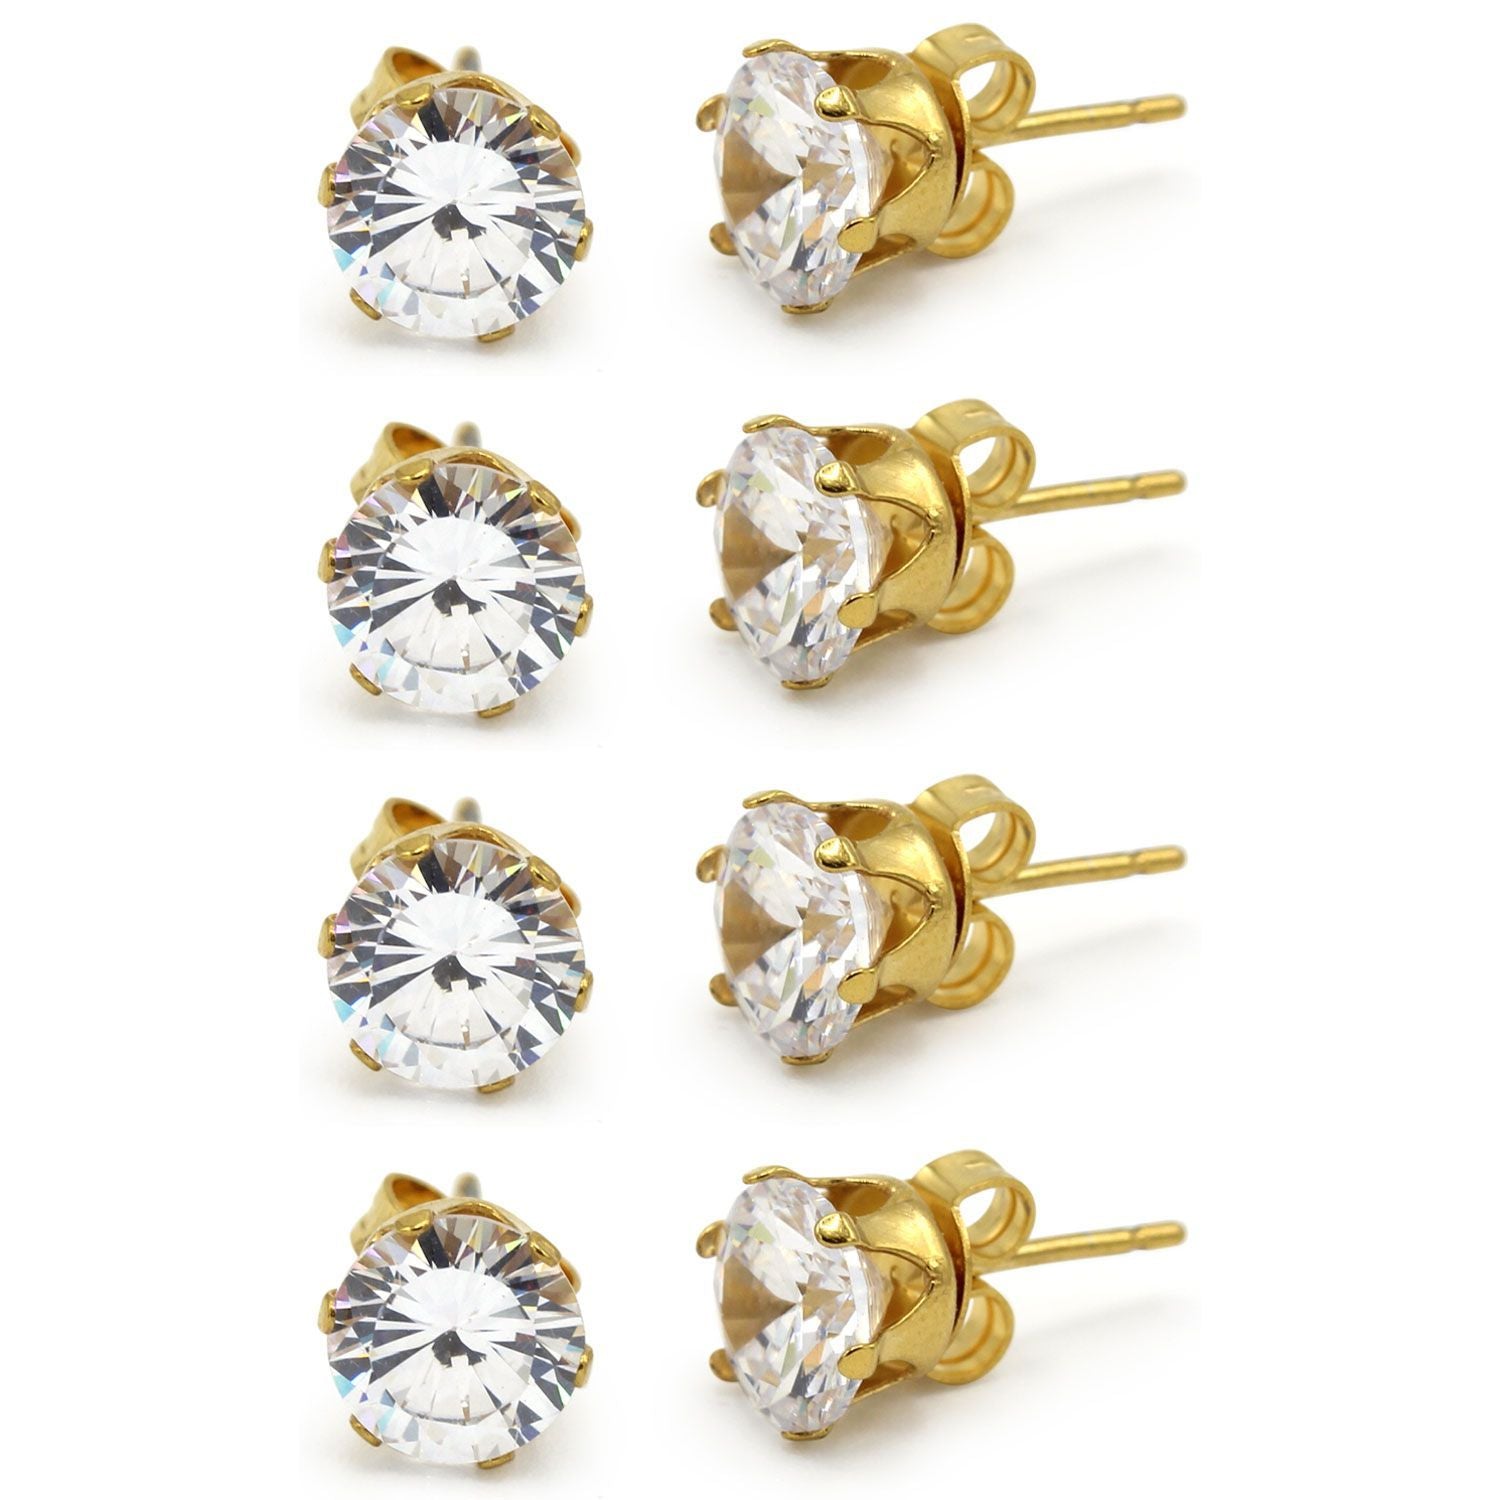 Cubic Zirconia Round 14K Gold Plated Stud Earrings Set Of 4 Stainless Steel Jewelry Men Women